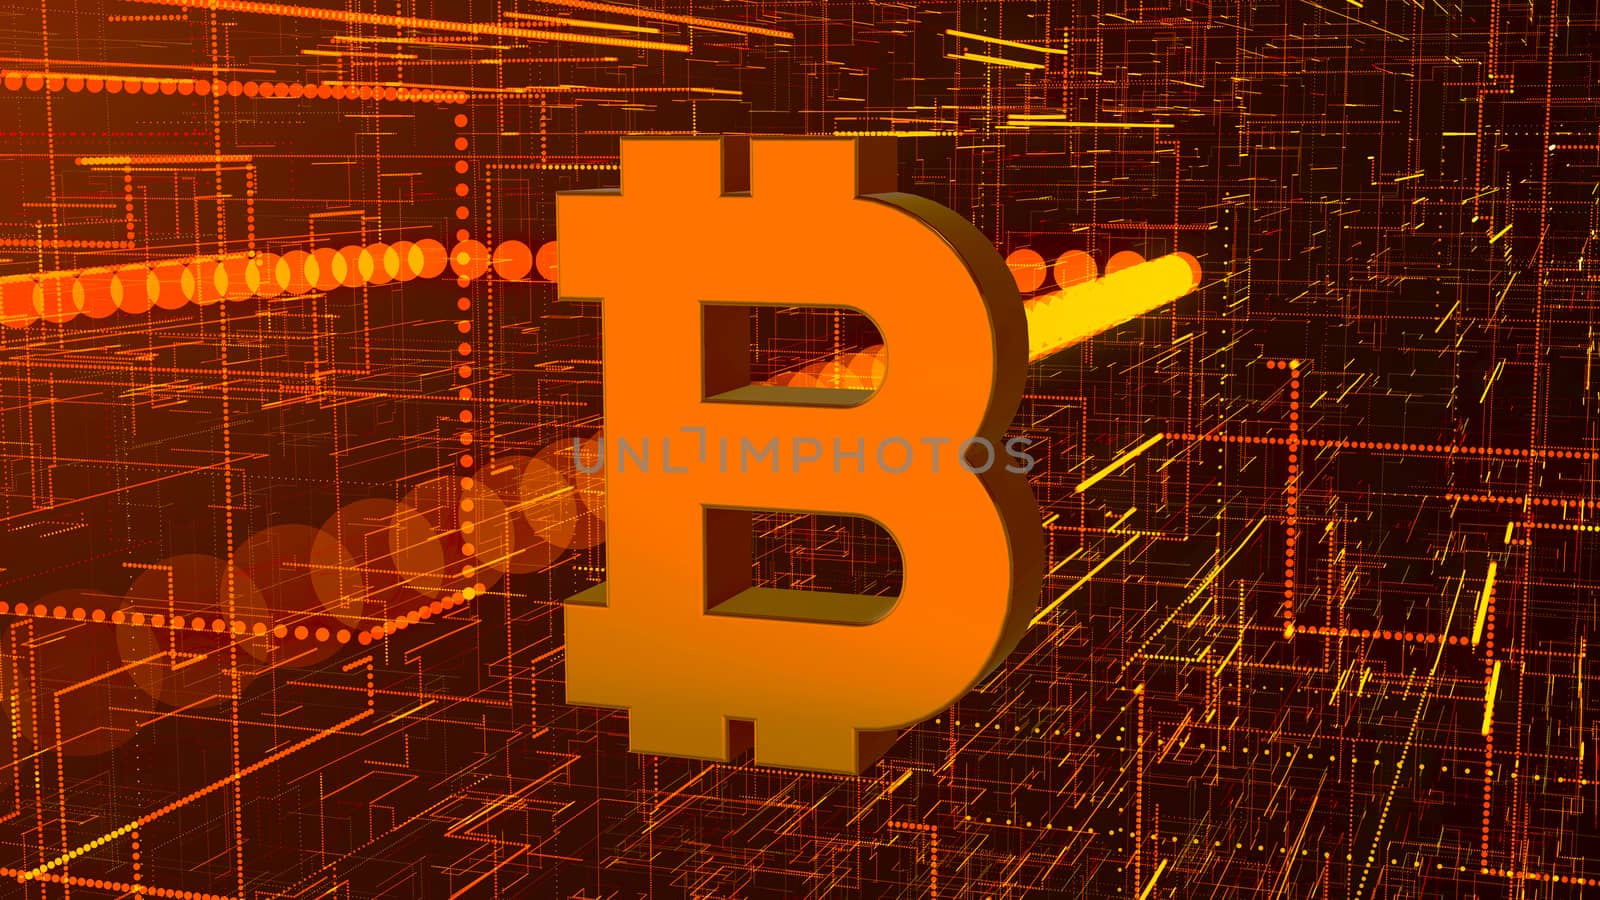 Abstract technology background with bitcoin sign. 3d rendering